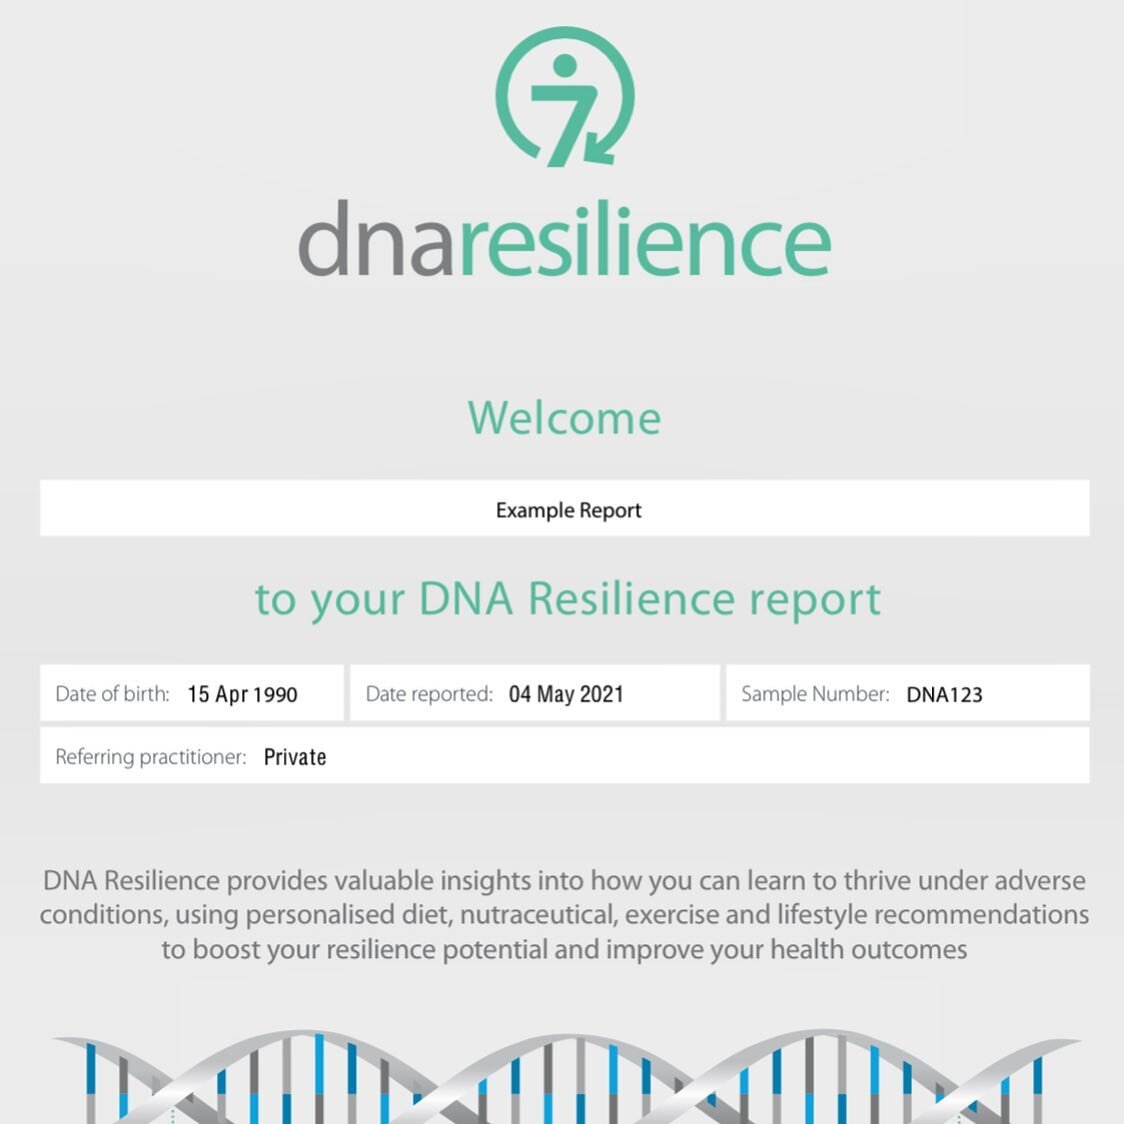 As a part of our Resilience Programs, this test - DNA Resilience provides valuable insights into how you can learn to thrive under adverse conditions, using personalised diet, nutraceutical, exercise and lifestyle recommendations to boost your resili